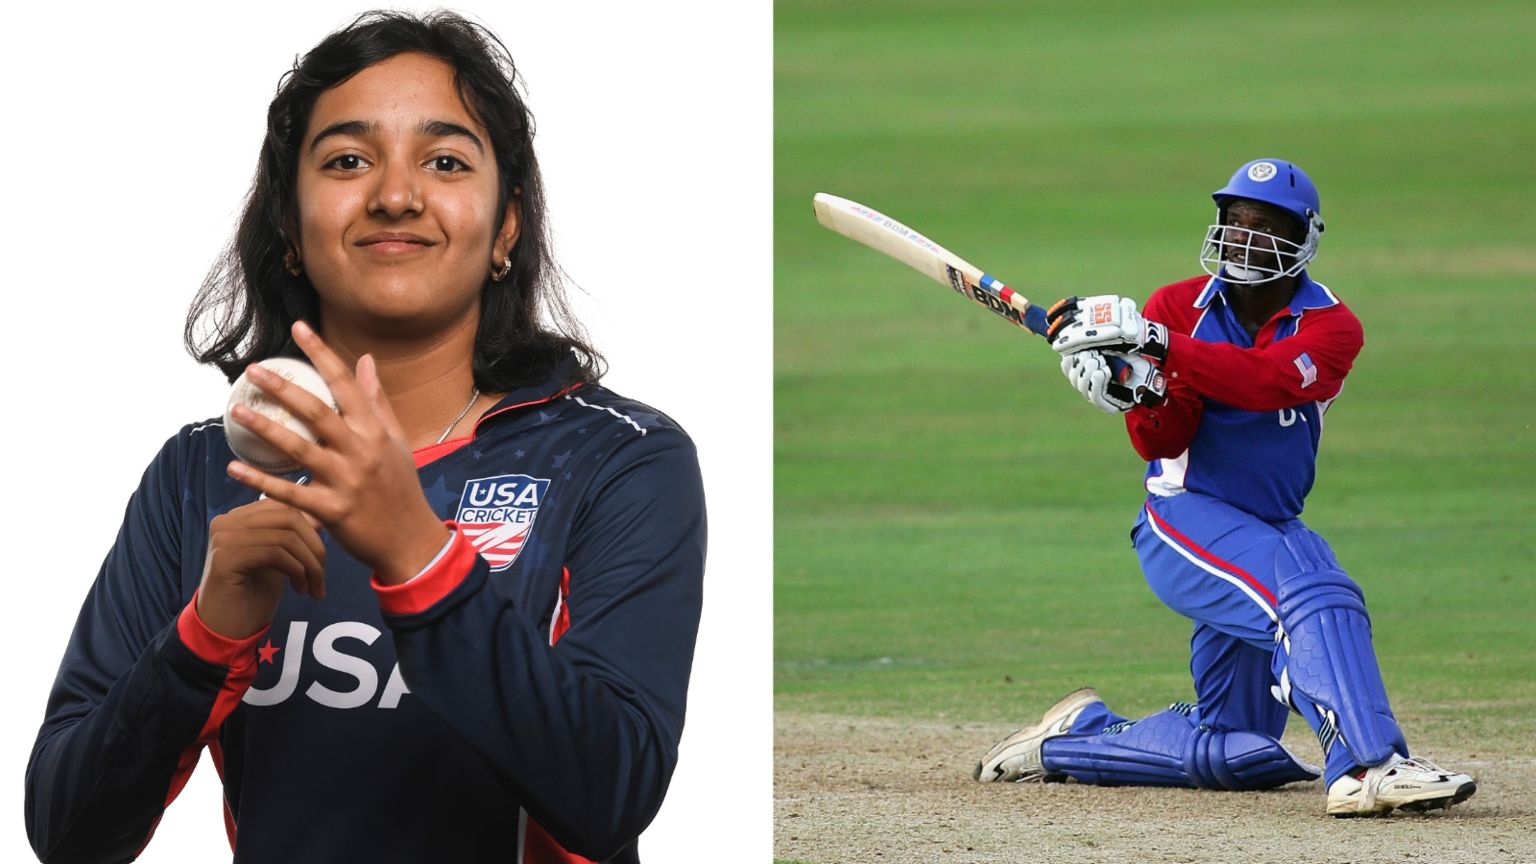 A composite image showing a promo photo of Sai Tanmayi Eyyni in USA kit spinning a ball in her hand and Clayton gets down on one knee to play a slog-sweep shot during a game for the USA